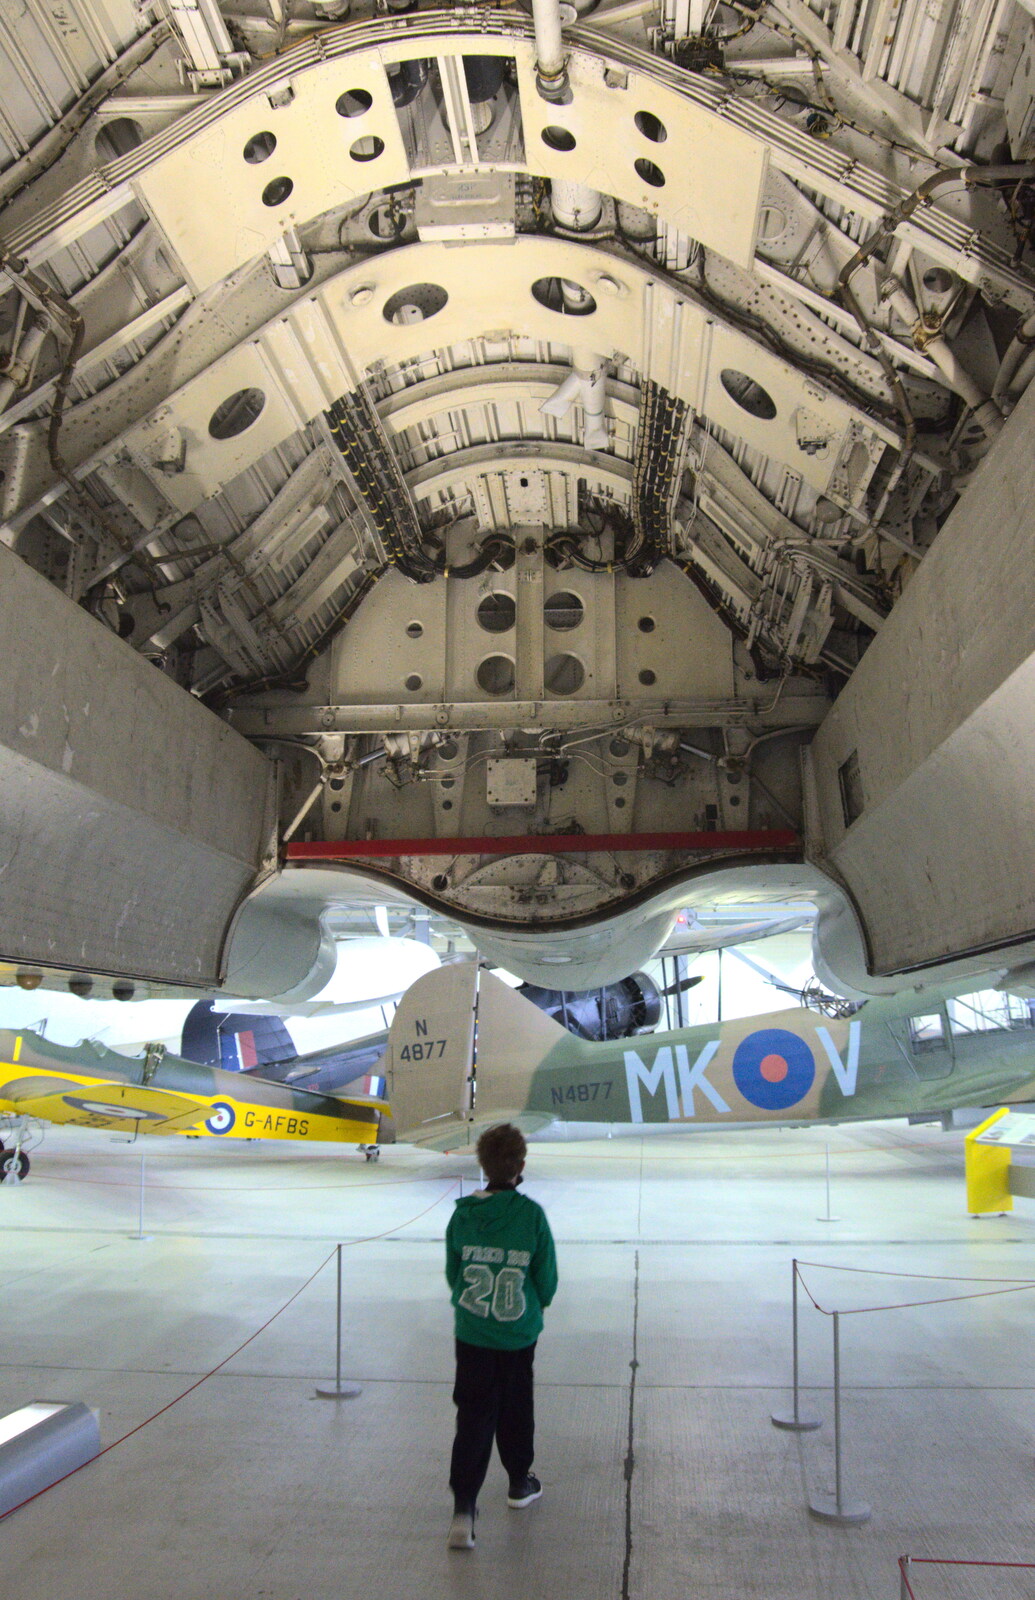 Fred looks up into the bomb bay of a Vulcan bomber from The Duxford Dash, IWM Duxford, Cambridge - 13th September 2020